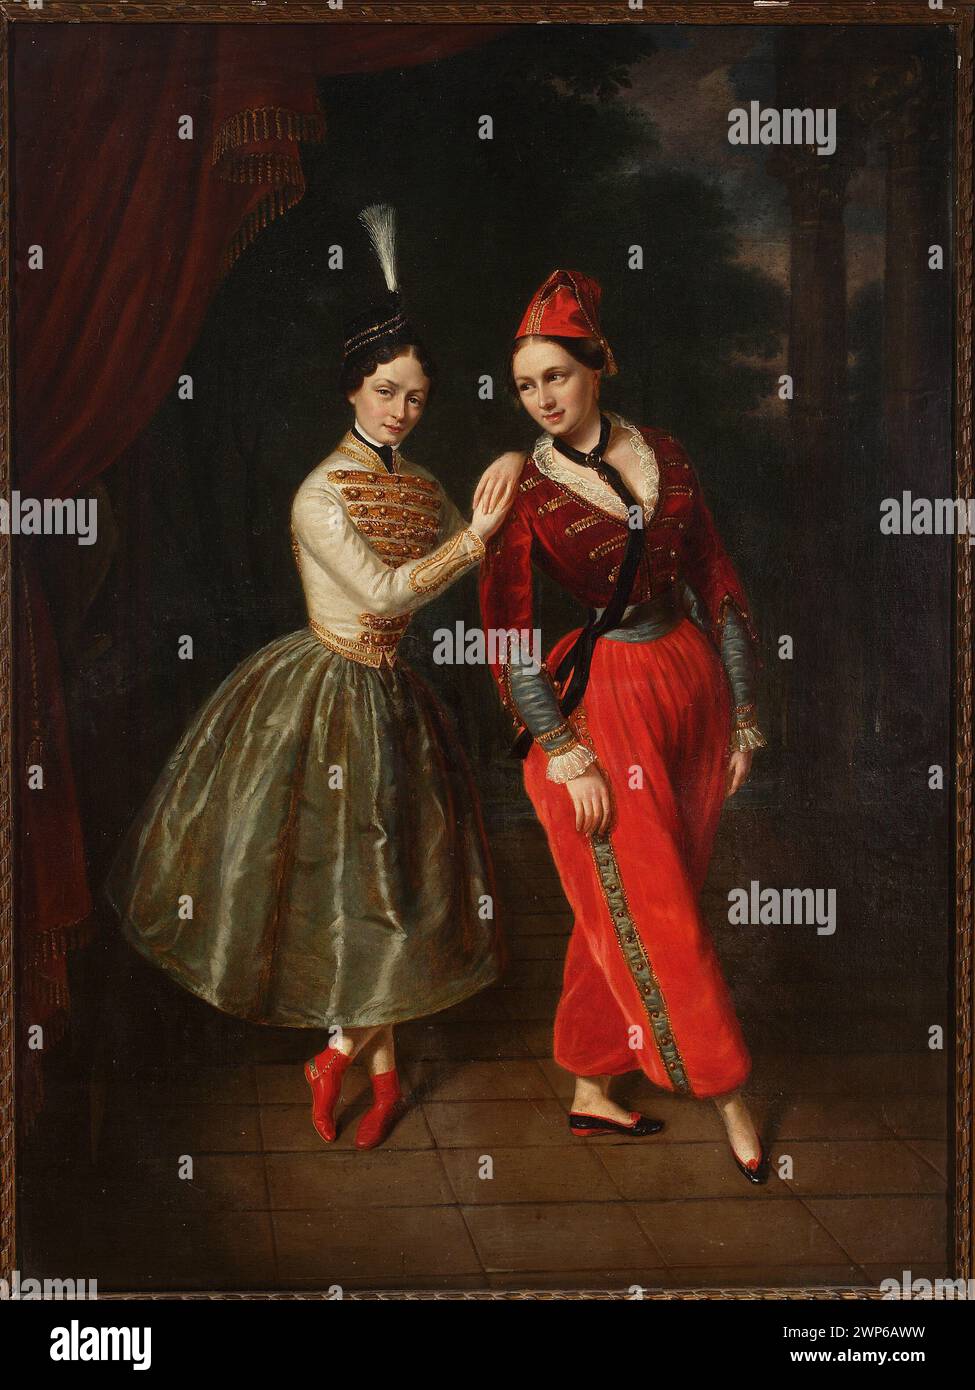 Portrait of the Sisters of Karolina and Anna Strauss, ballet dancers of the Grand Theater; Kaniewski, Jan Ksawery (1805-1867); around 1853 (1850-00-00-1860-00-00);Orient, Grand Theater (Warsaw), Society for the Encouragement of Fine Arts (Warsaw - 1860-1940), Society for the Encouragement of Fine Arts (Warsaw - 1860-1940) - collection, ballet, ballet costumes, headgear, portraits of artists, female portraits, double portraits , primaballerine, oriental costumes, dance, theaters Stock Photo